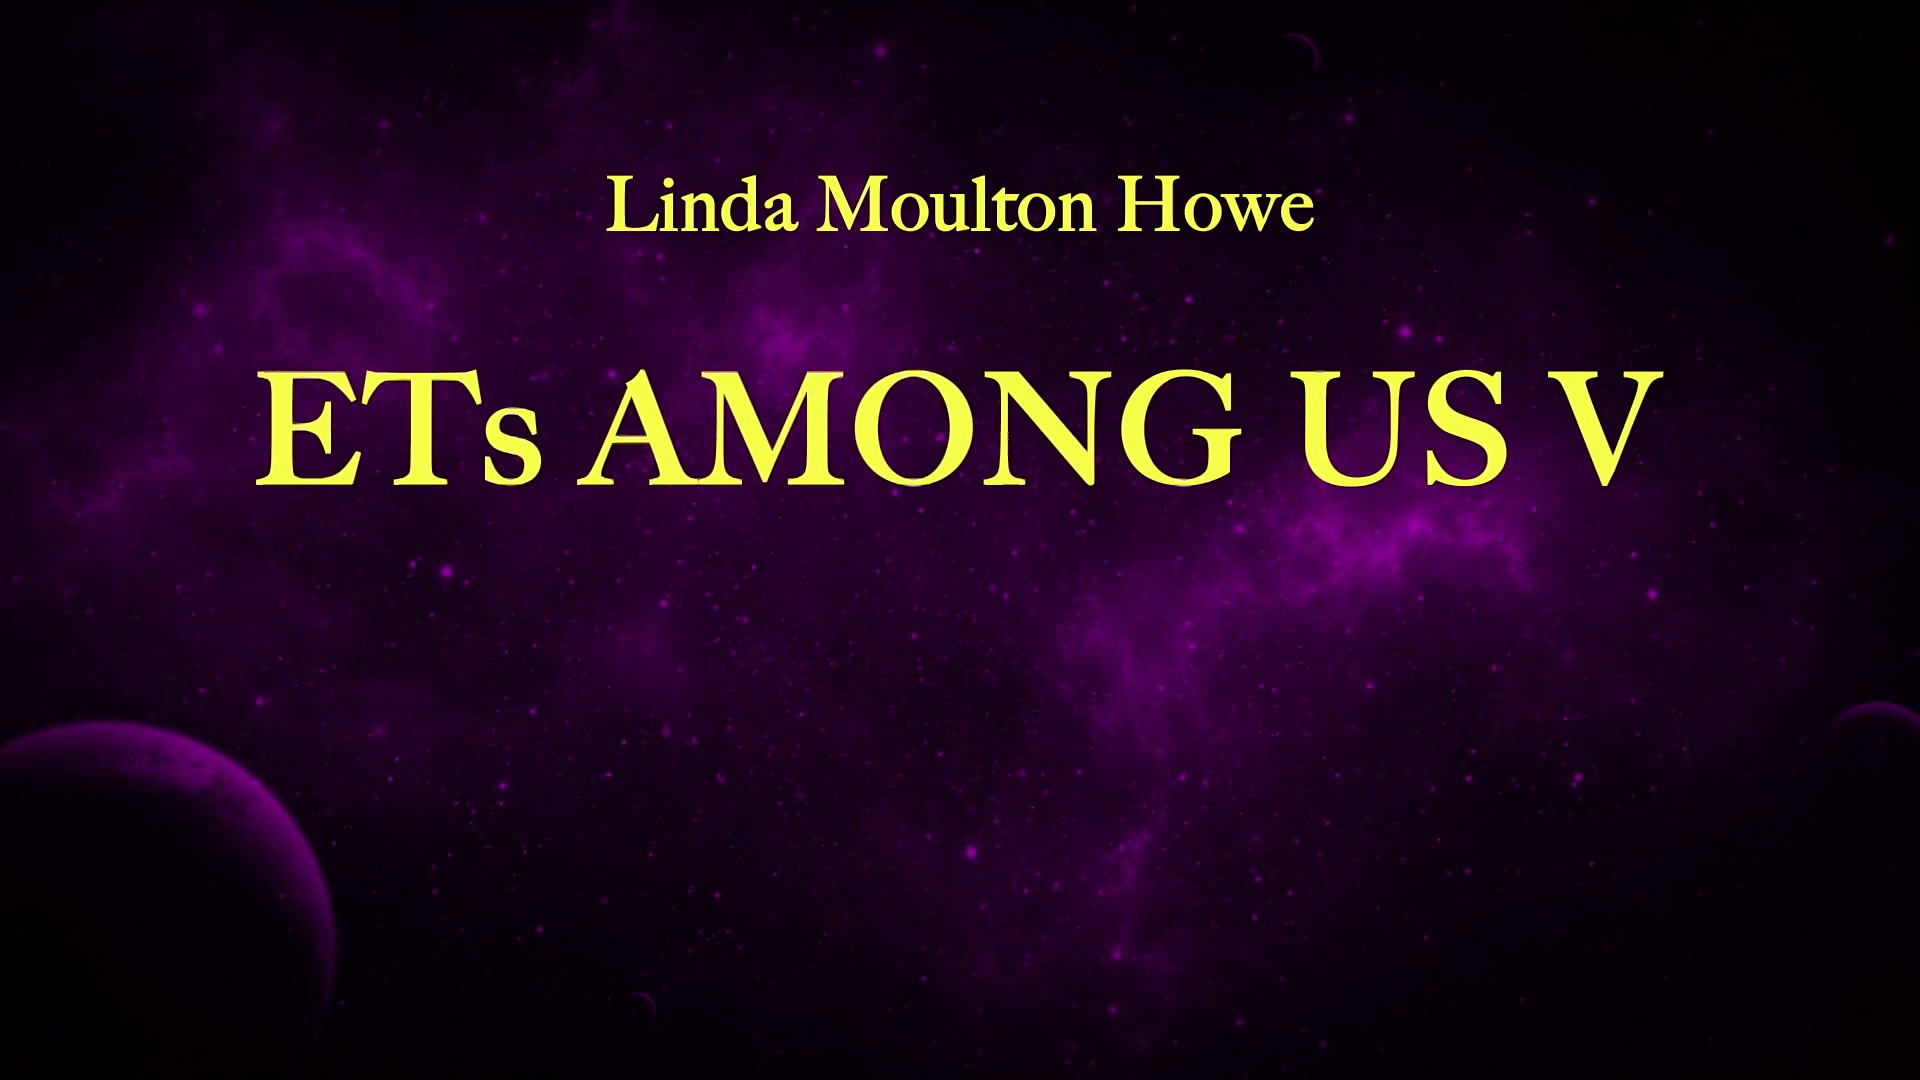 Ets Among Us 5 Binary Code Secret Messages From The Cosmos With Linda Moulton Howe 2020 1080p